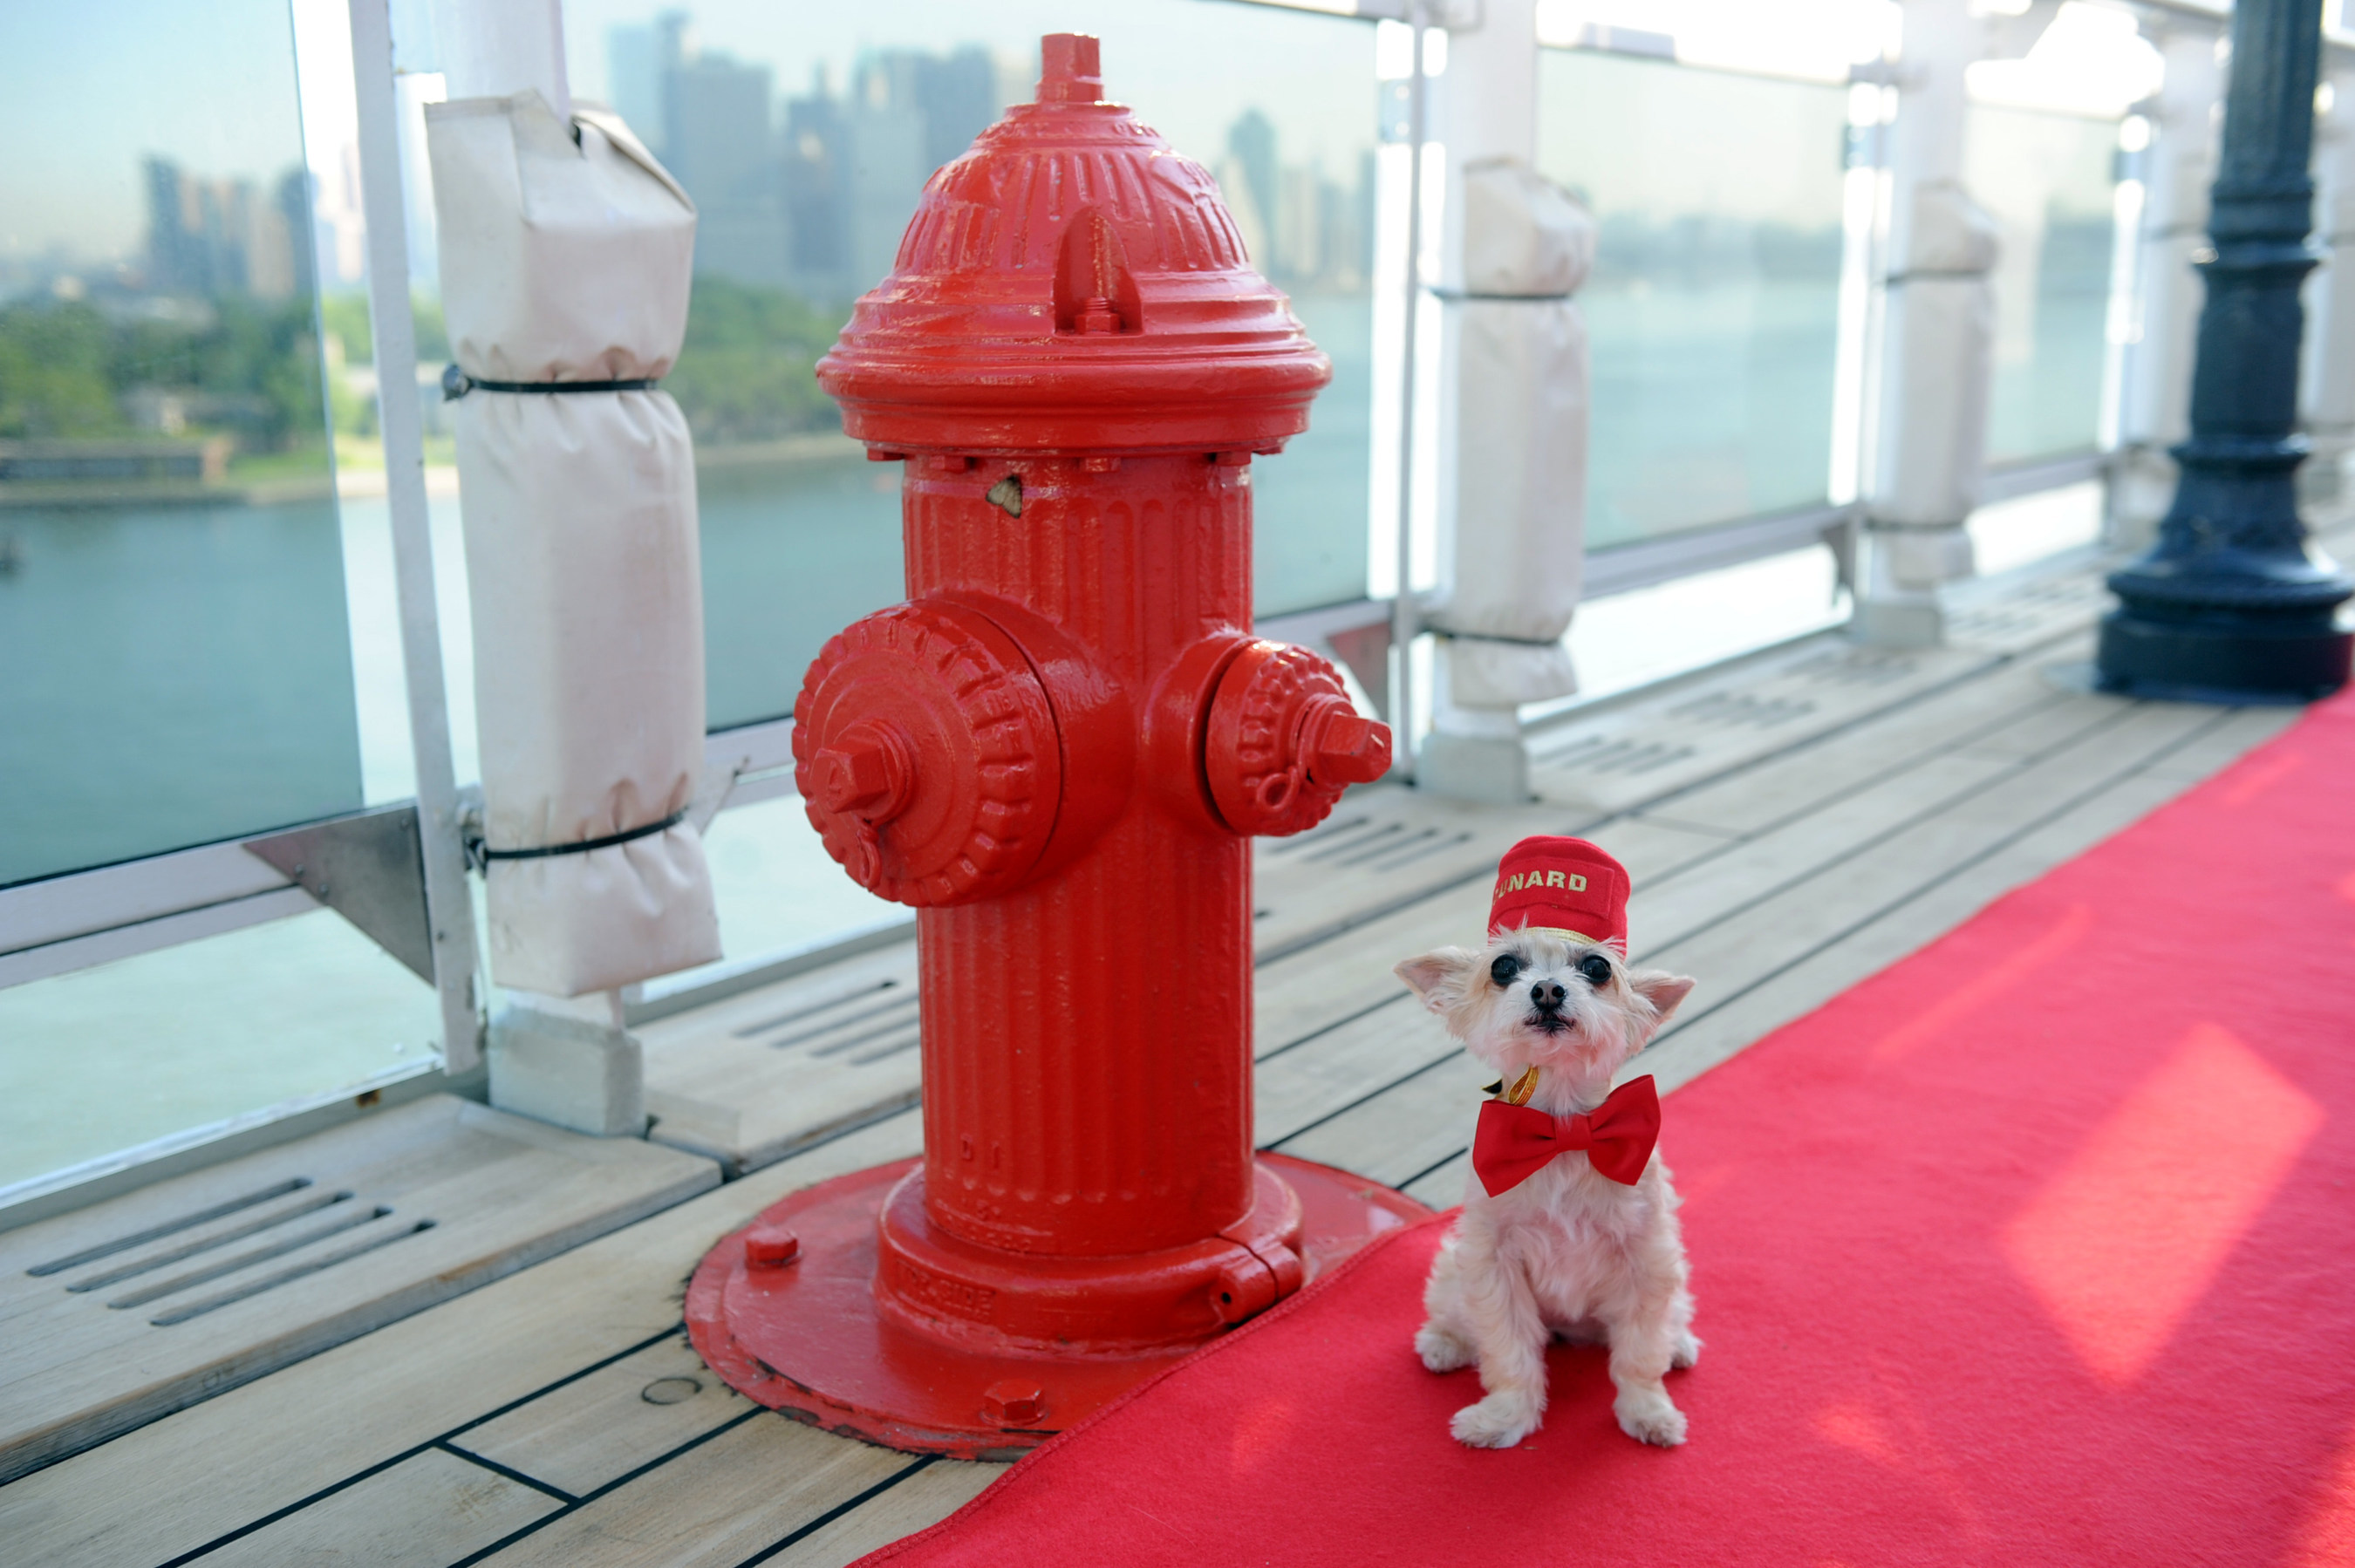 Ella Bean, a Yorkie mix, enjoys the remastered kennels on the Queen Mary 2, the only passenger liner to carry pets, Wednesday, July 6, 2016, at Brooklyn Cruise Terminal in New York, its U.S. homeport. (Diane Bondareff/AP Images for Cunard)